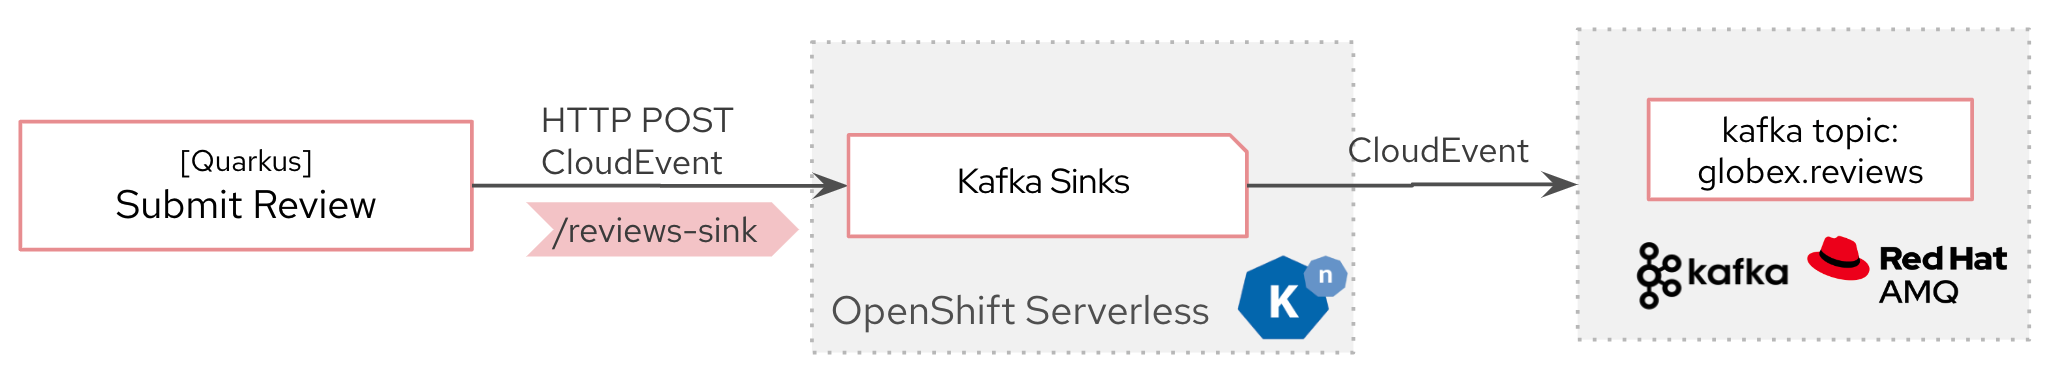 Step 1: Product review submitted by user flows into Kafka